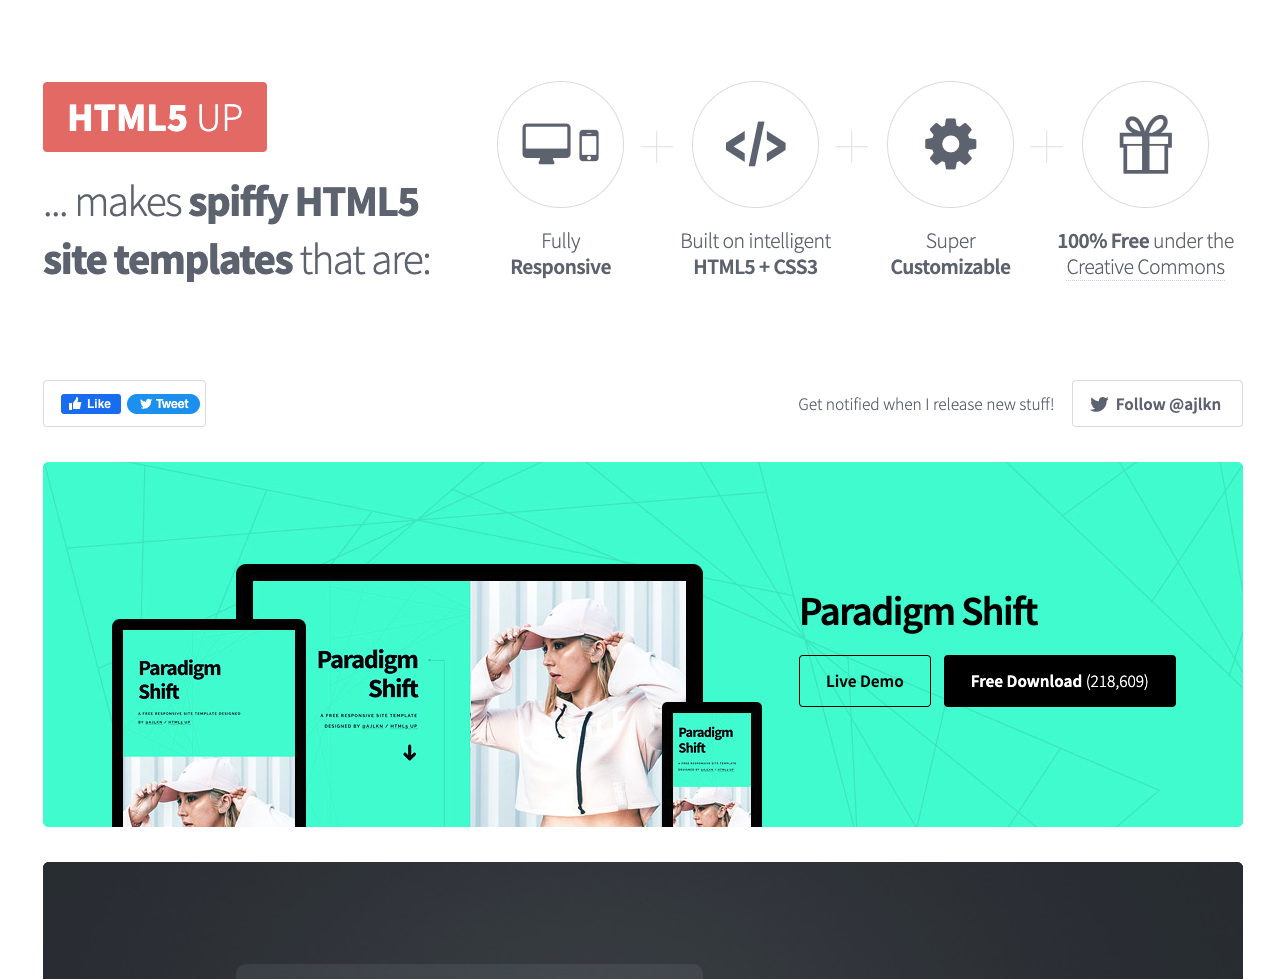 Share 100 free website templates for developers, there is always one suitable for you